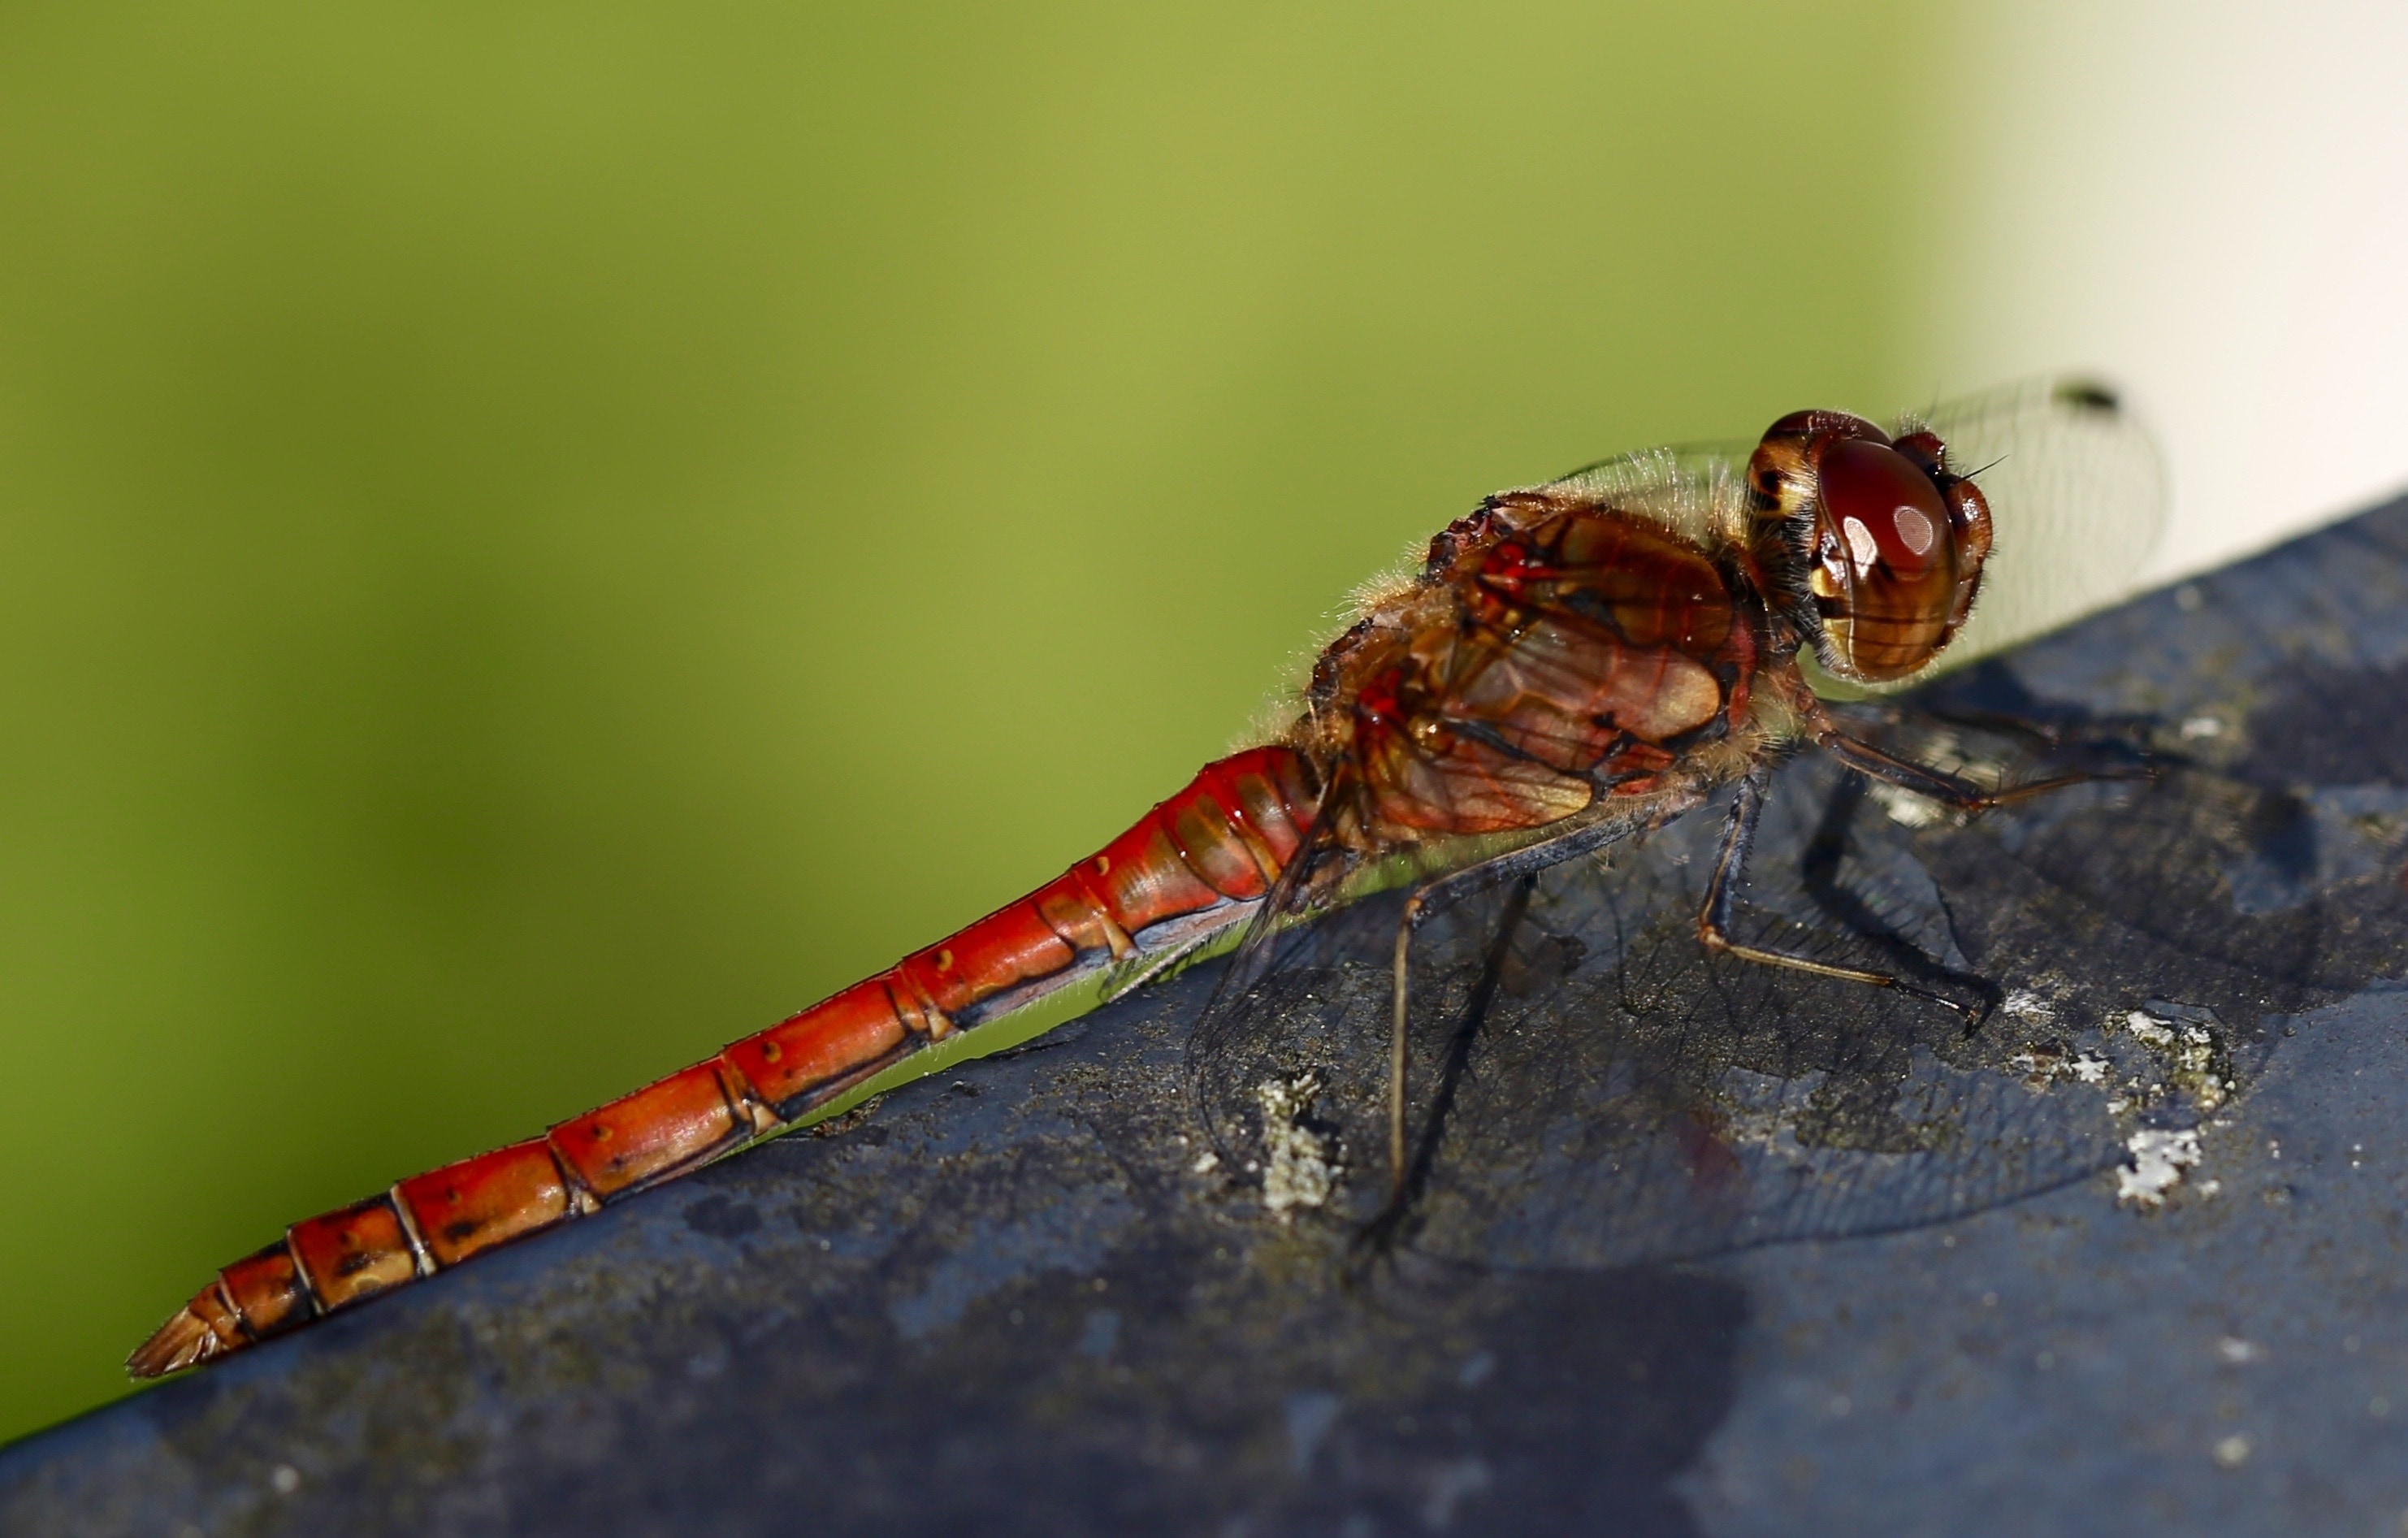 Nature, Dragonfly, Insect, Animal, Close, insect, animal themes